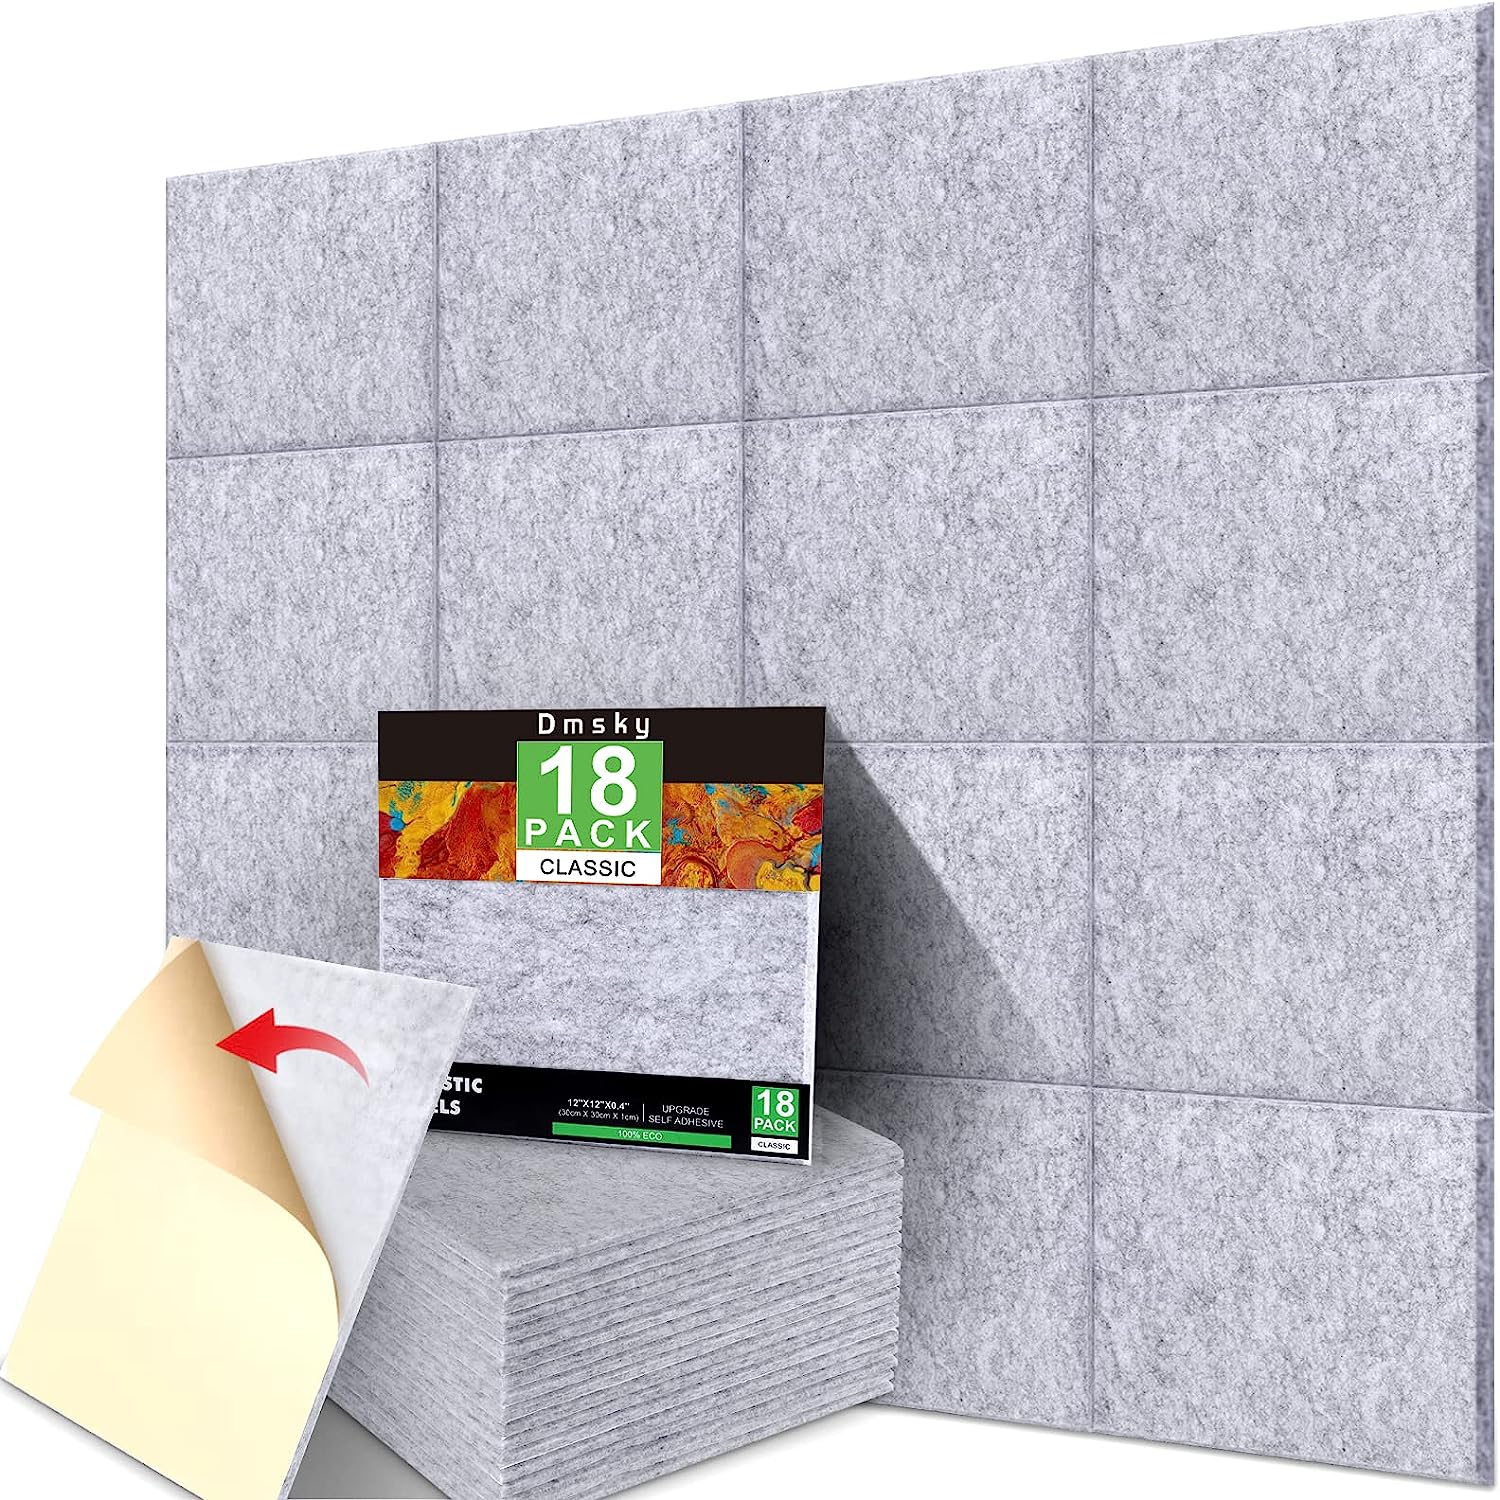 sound insulation for walls product review